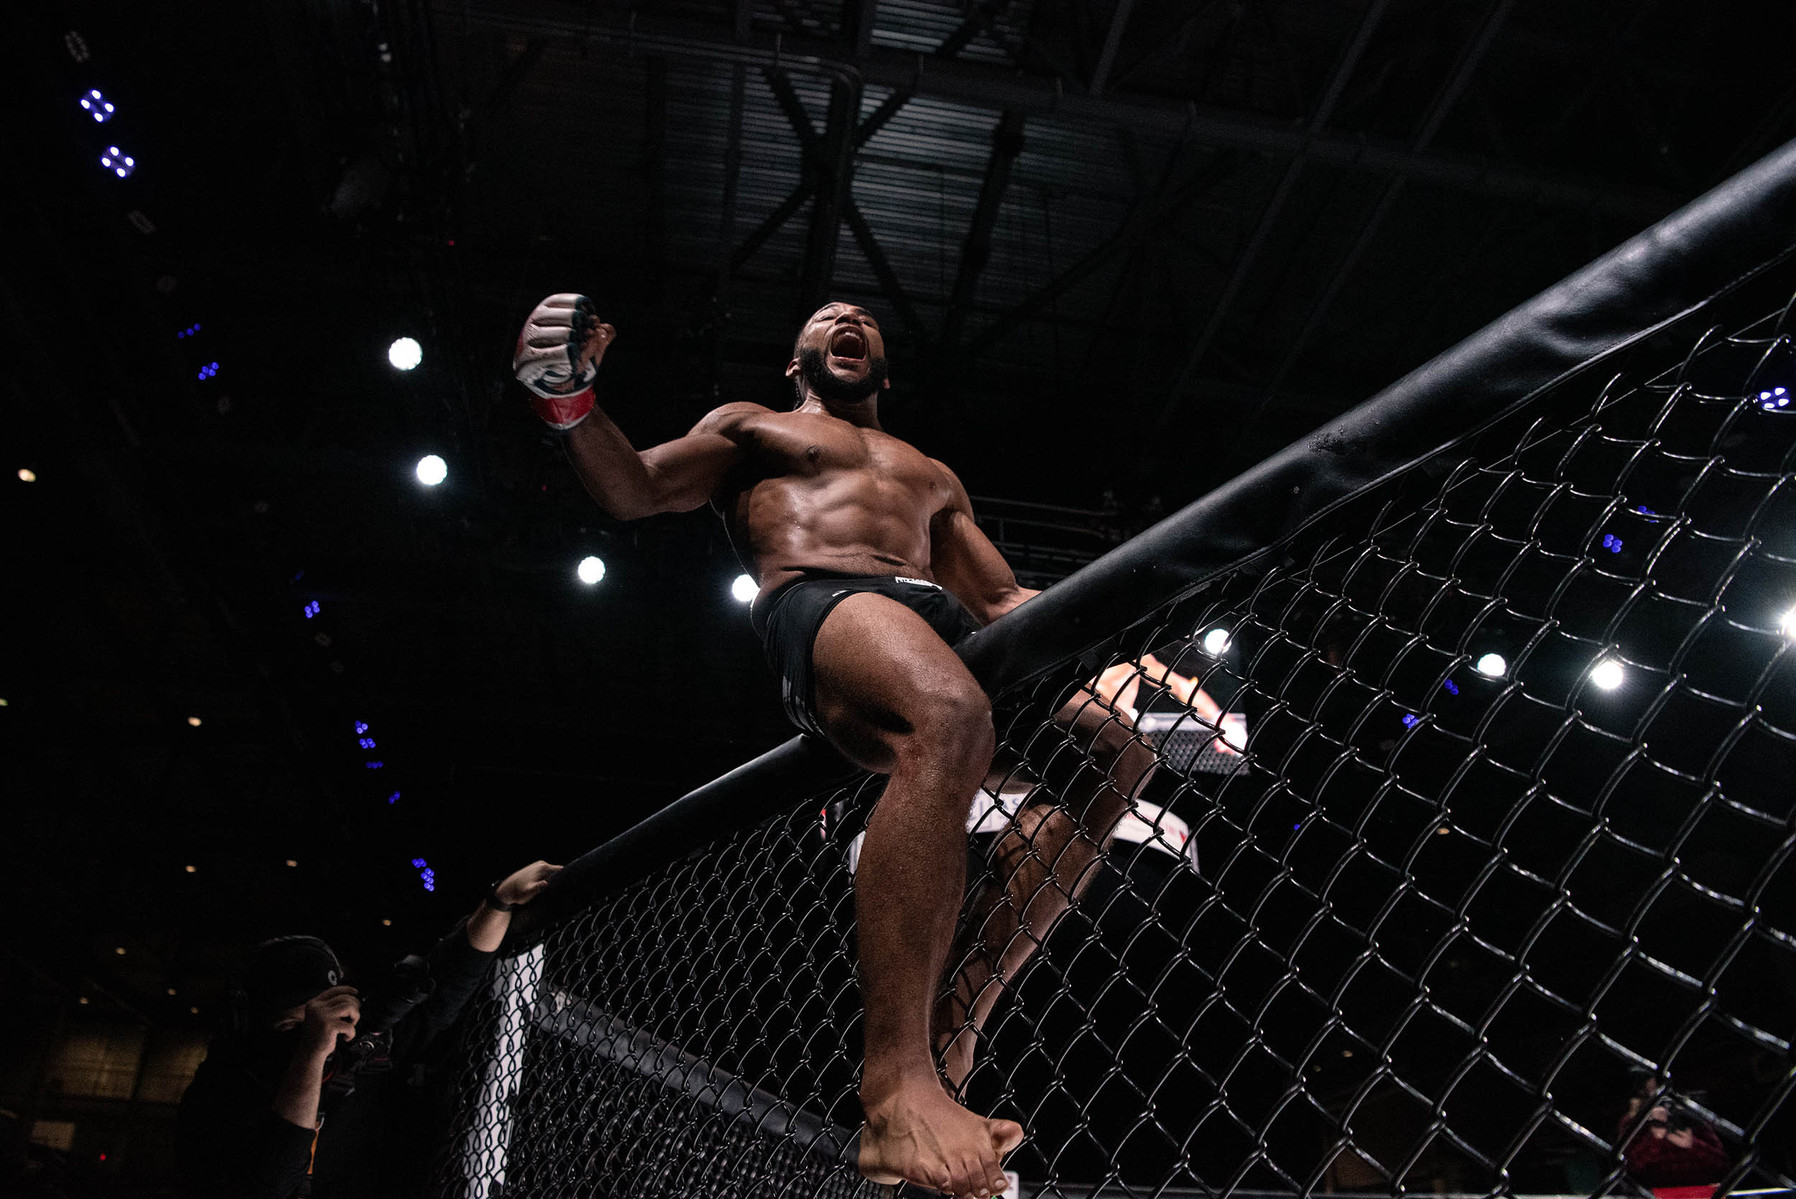 Teshay Gouthro celebrates atop the fenced walls of the octagon following his bantamweight fight victory over Kristian Bouchard during the BTC 13 Power event at the Meridian Centre on Nov. 20, 2021 in St. Catharines, Ont.